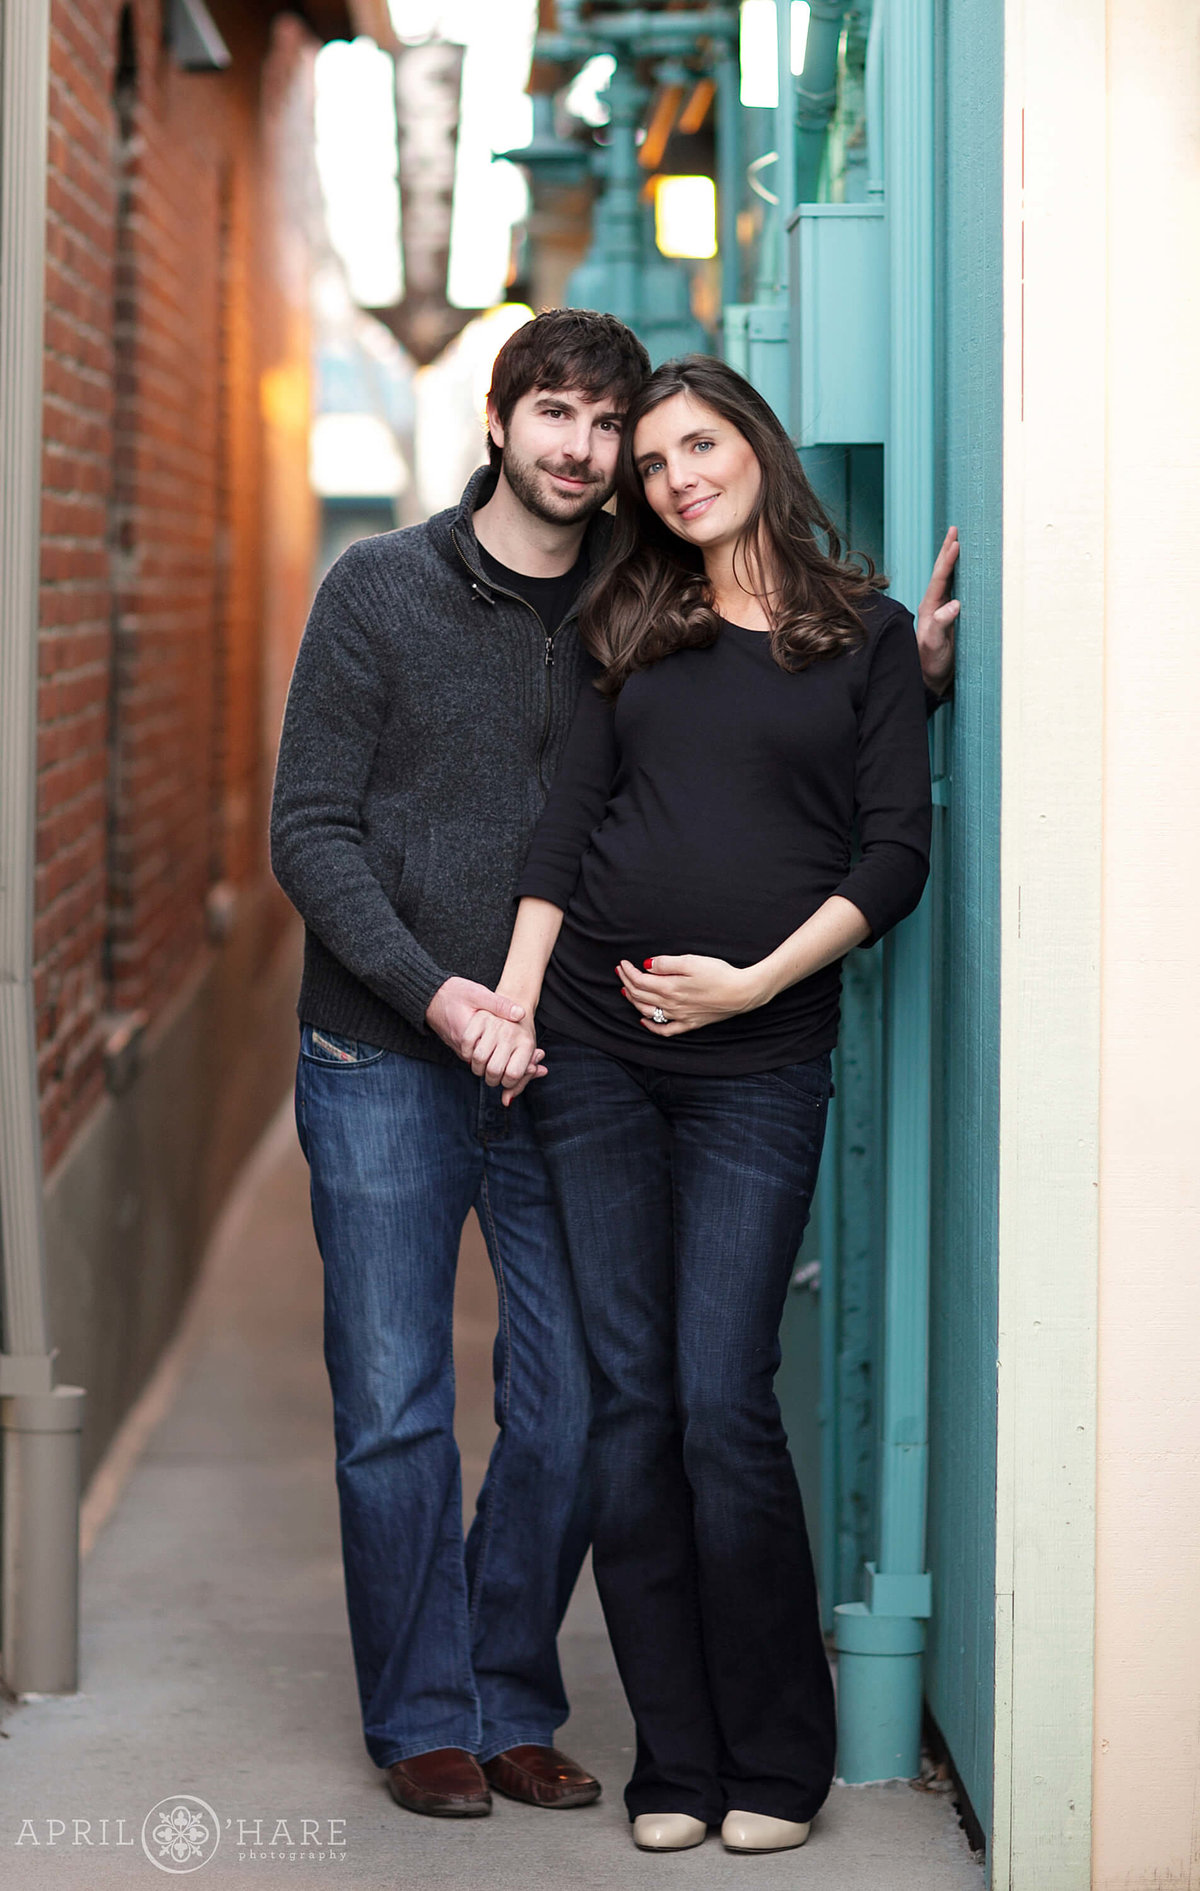 Cute Urban Maternity Photography Session in the Highlands Neighborhood